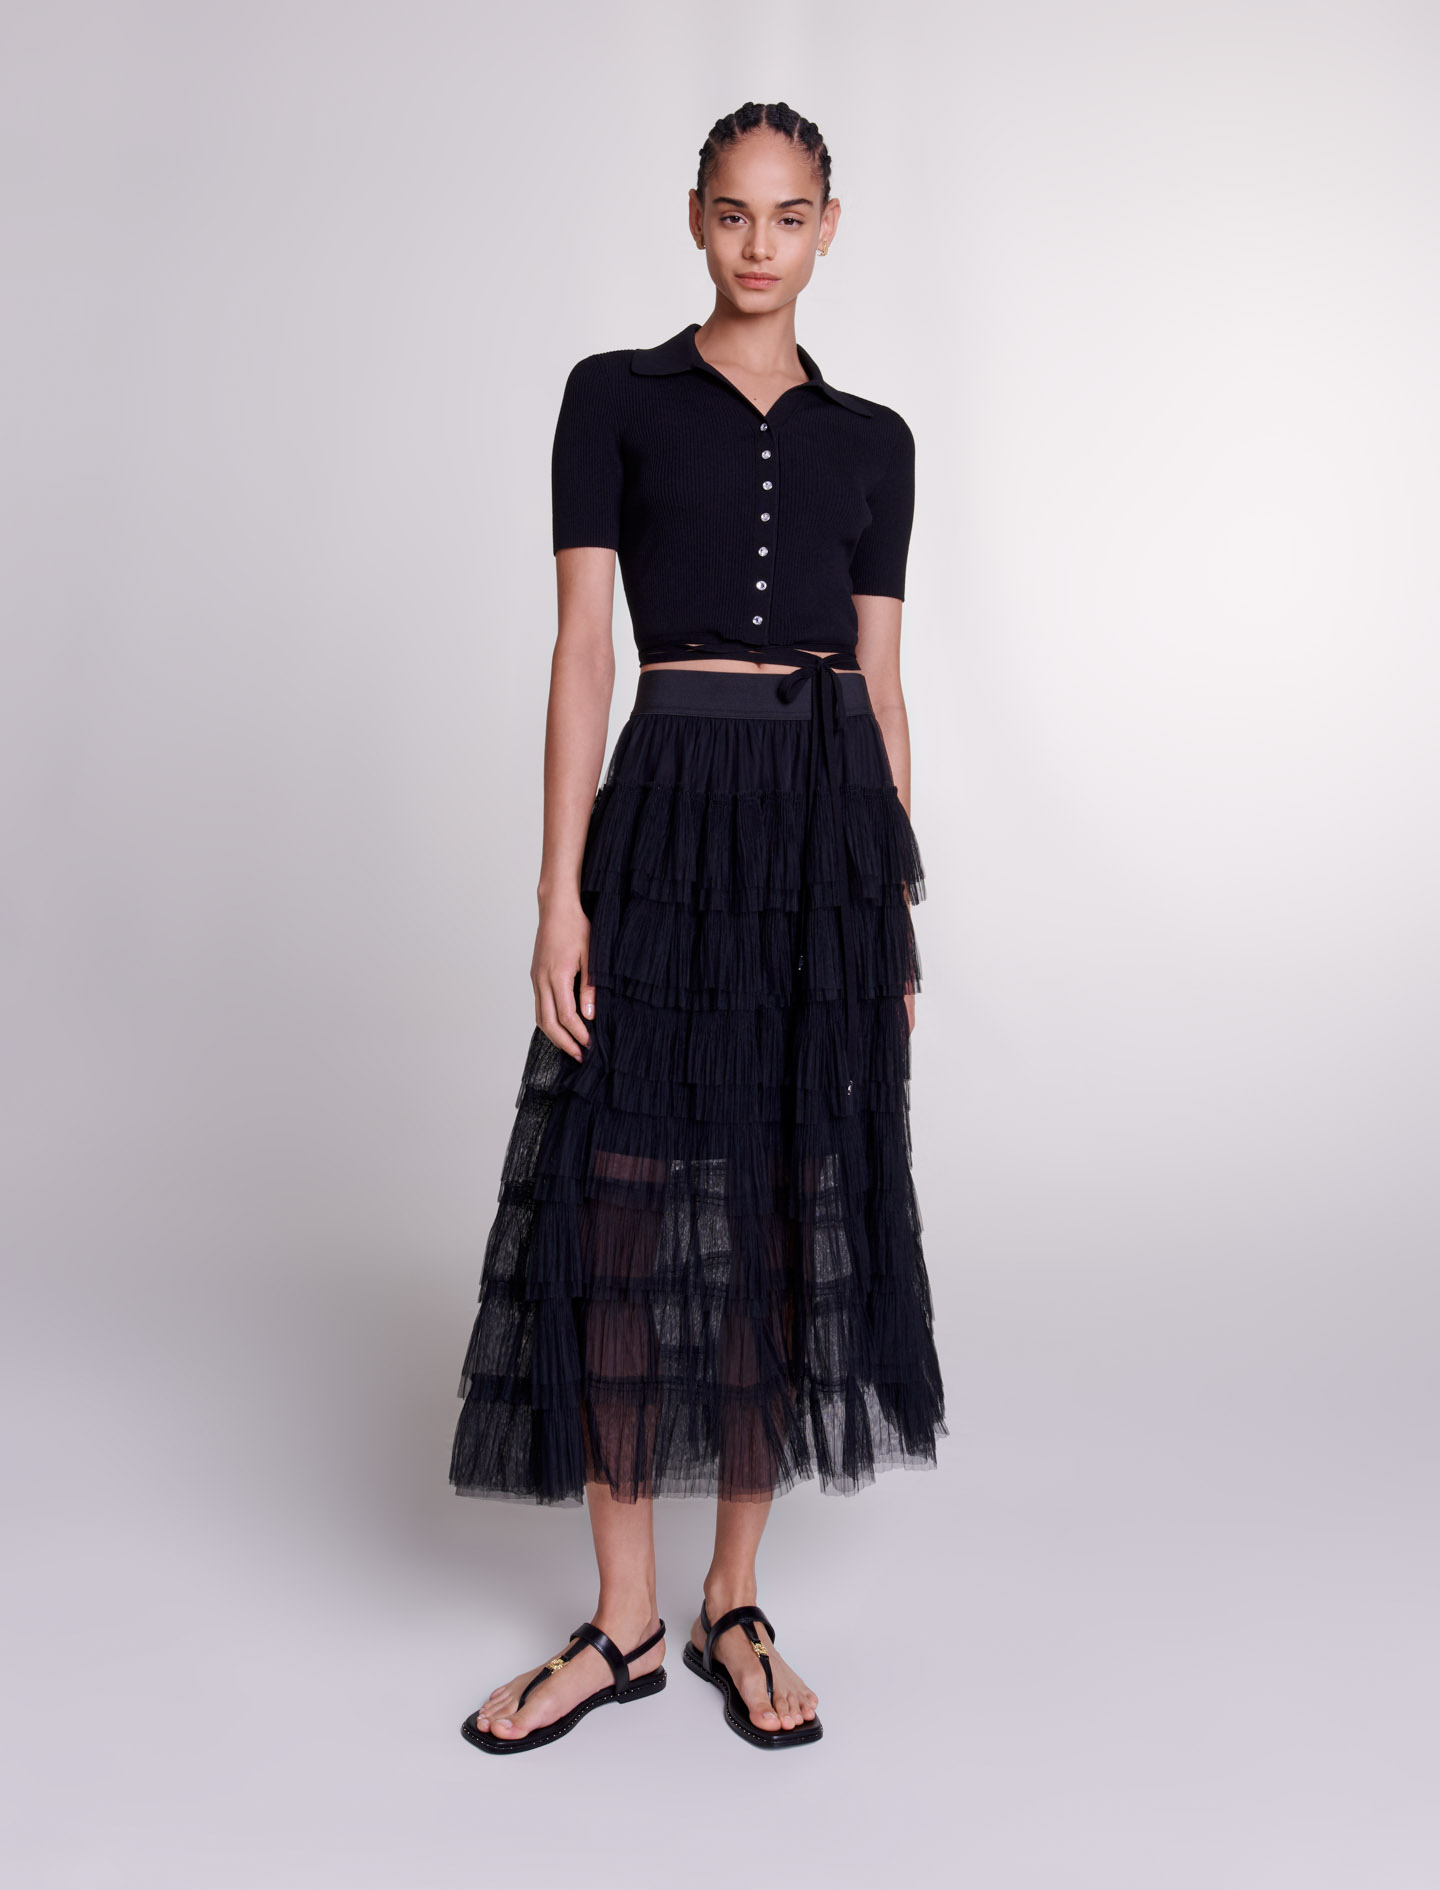 Maje Woman's polyester Lining: TULLE MIDI SKIRT for Fall/Winter, in color Black / Black